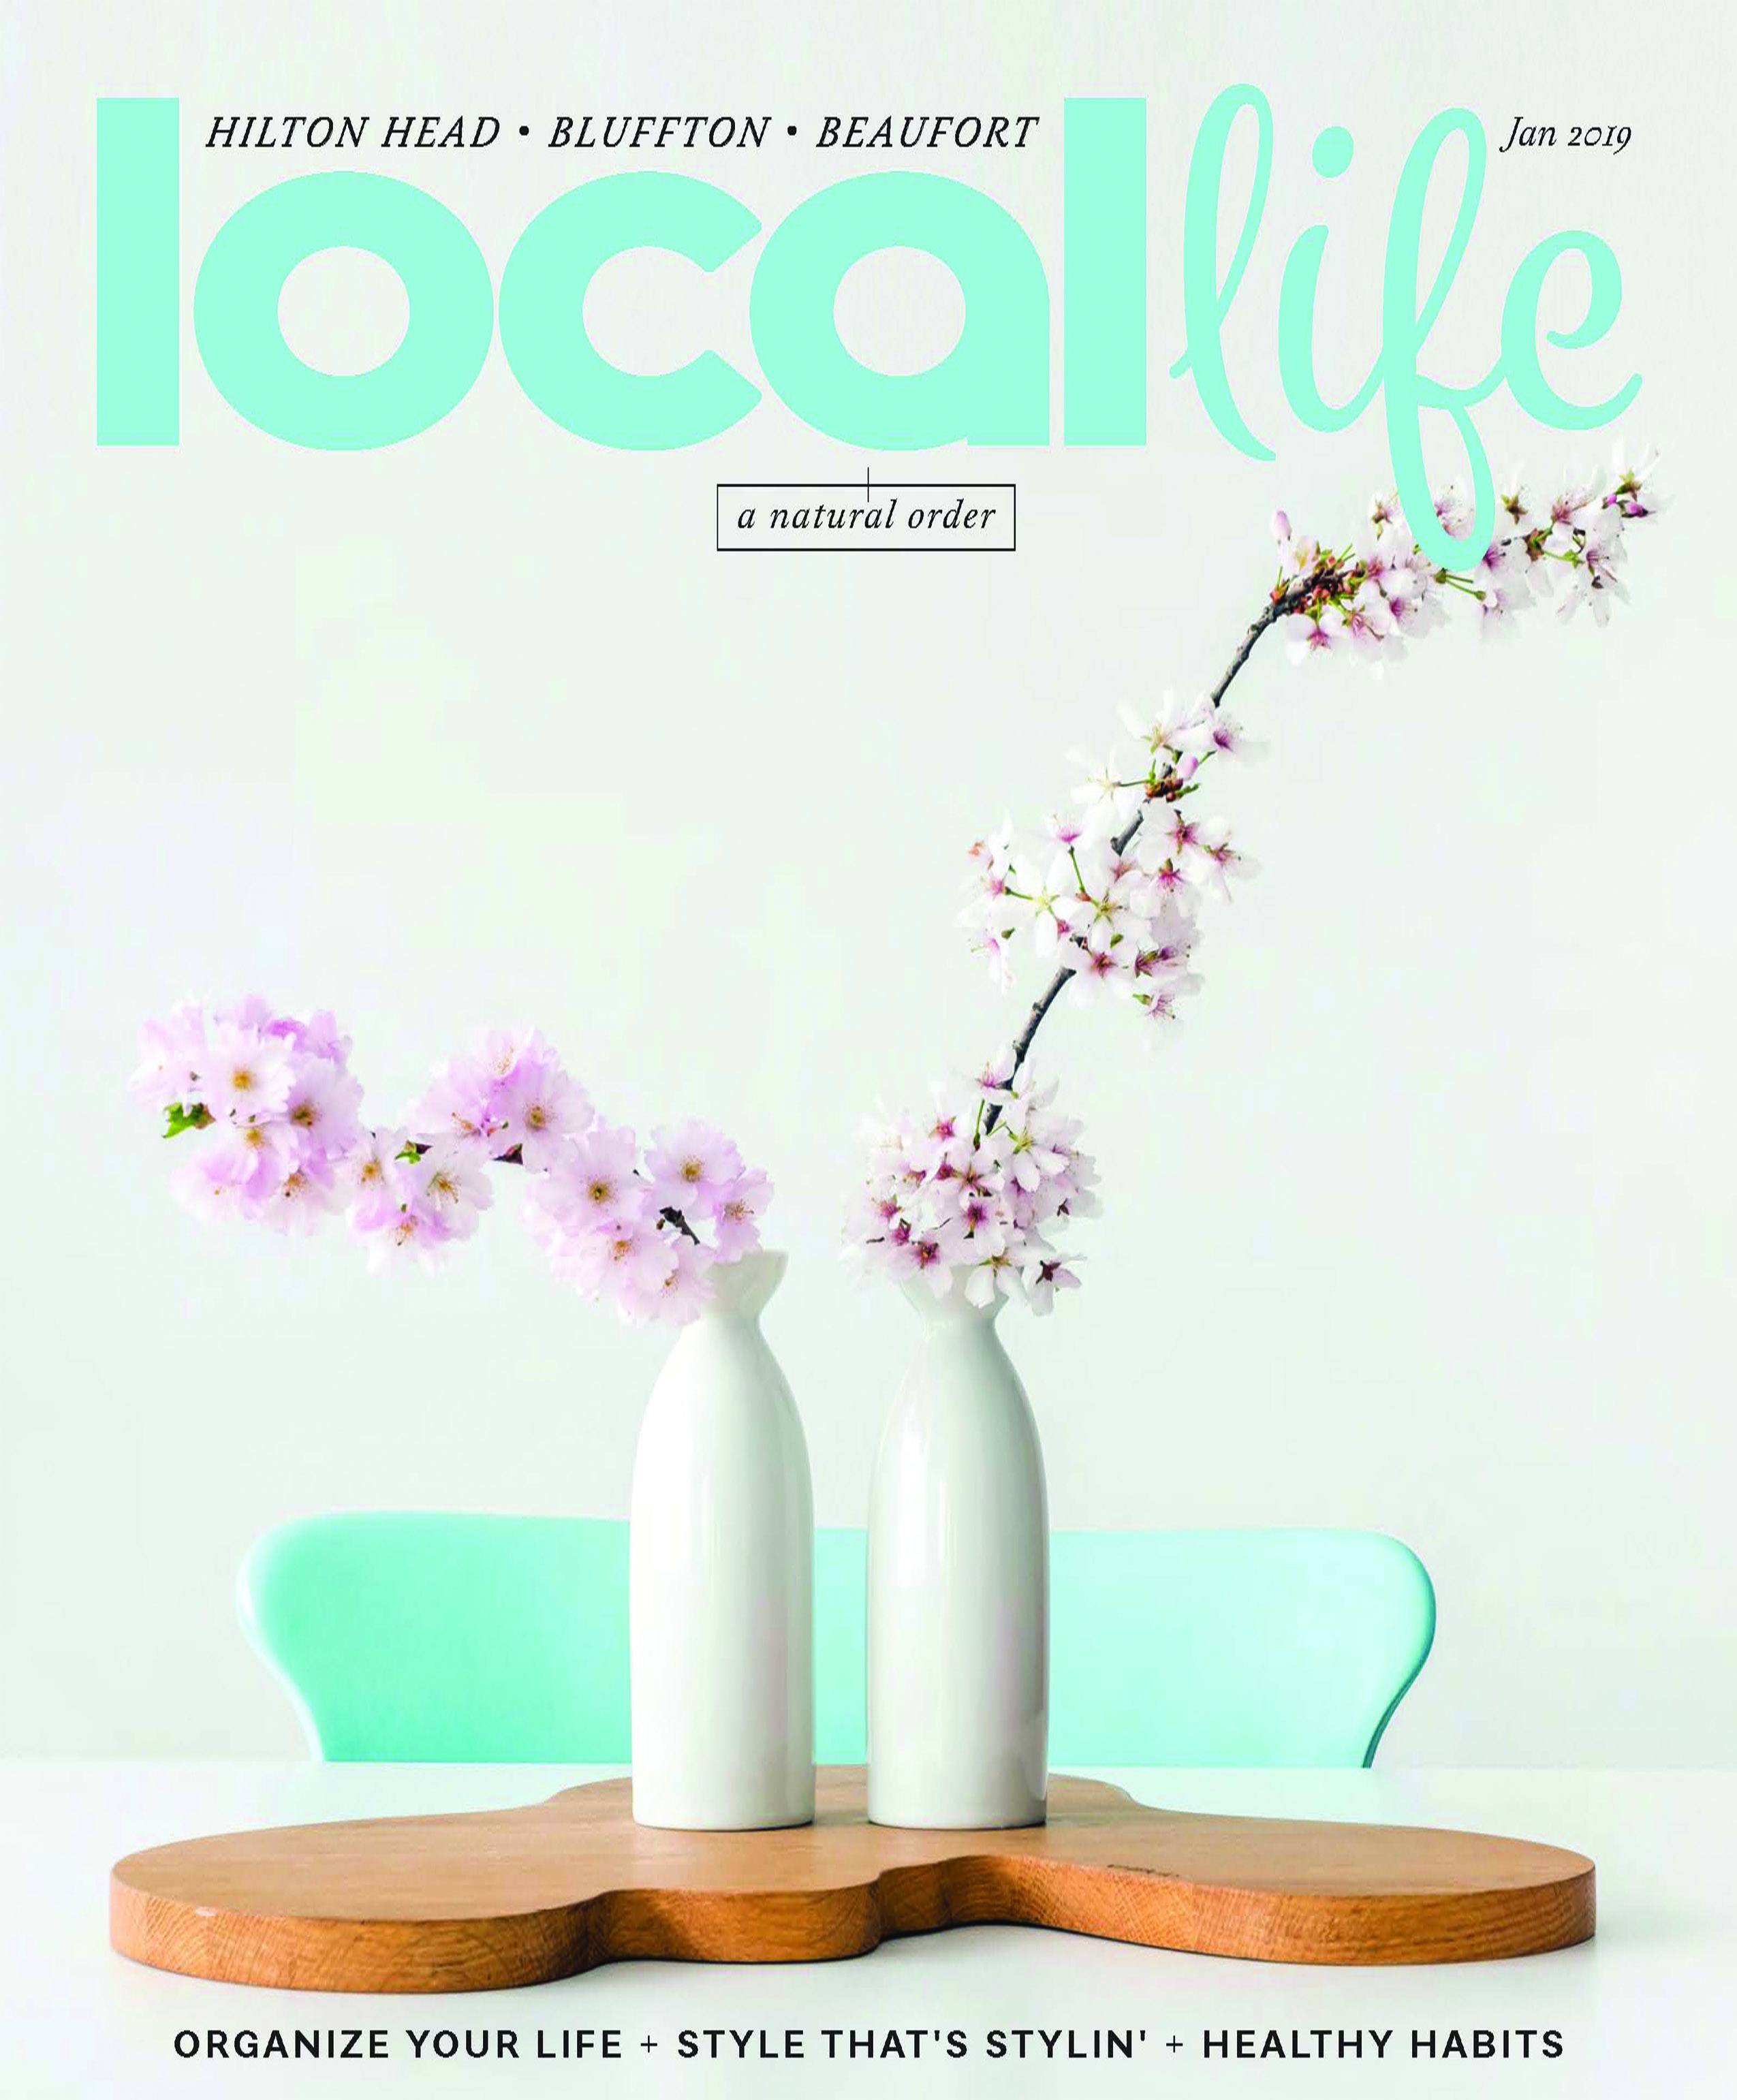 cover of Local Life Hilton Head Island January 2019 featuring J. Banks Design Group projects